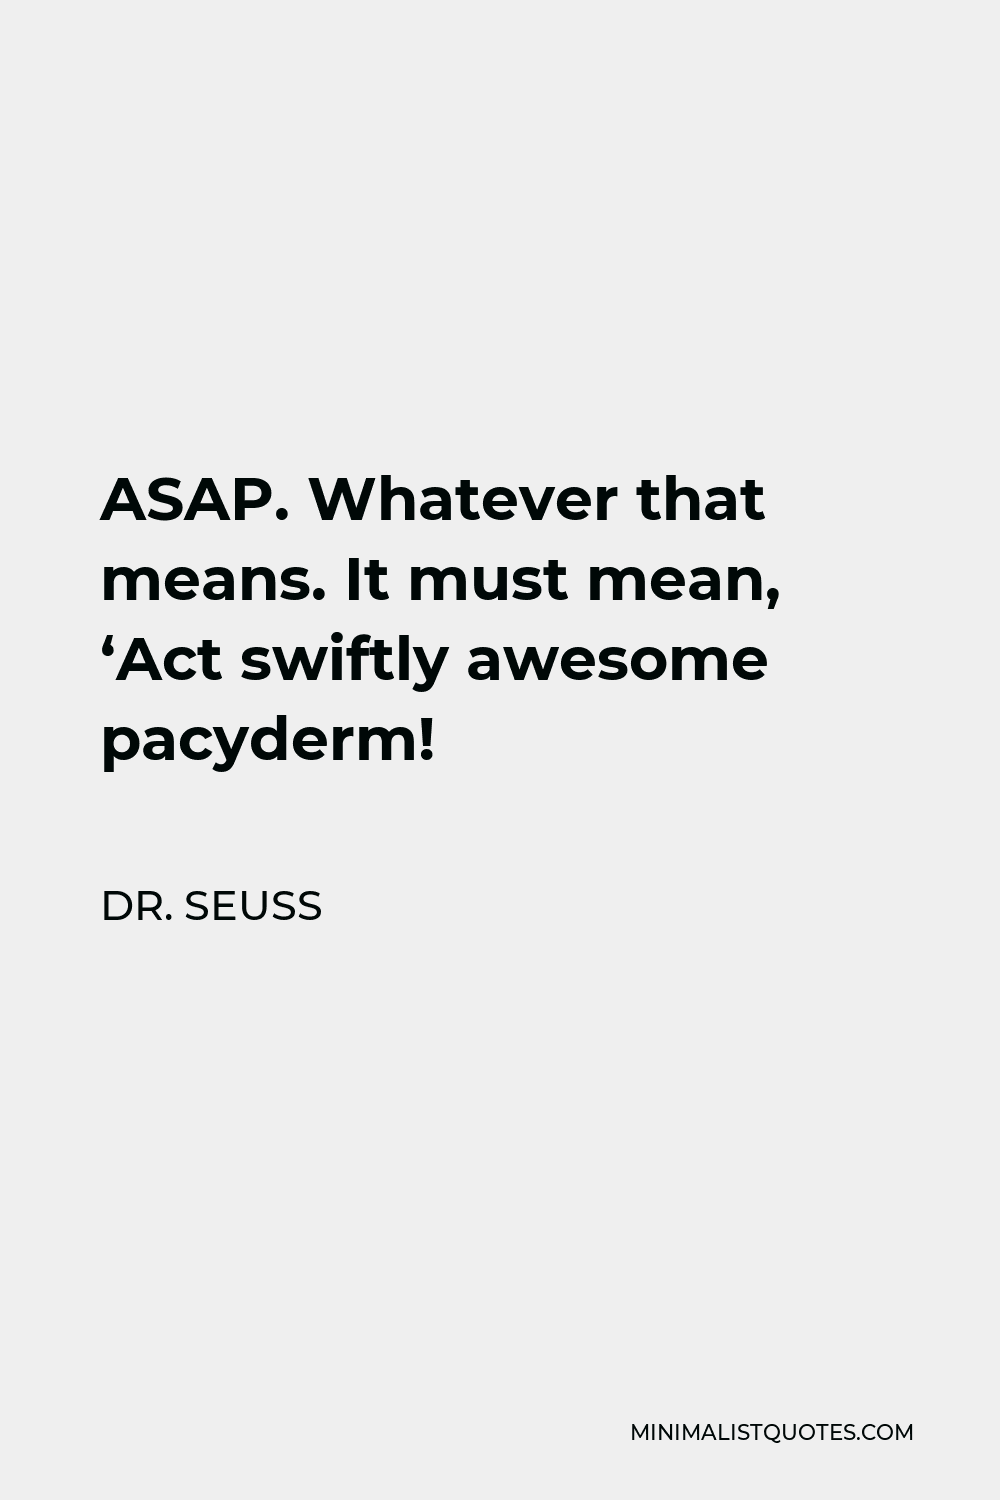 Dr. Seuss Quote - ASAP. Whatever that means. It must mean, ‘Act swiftly awesome pacyderm!